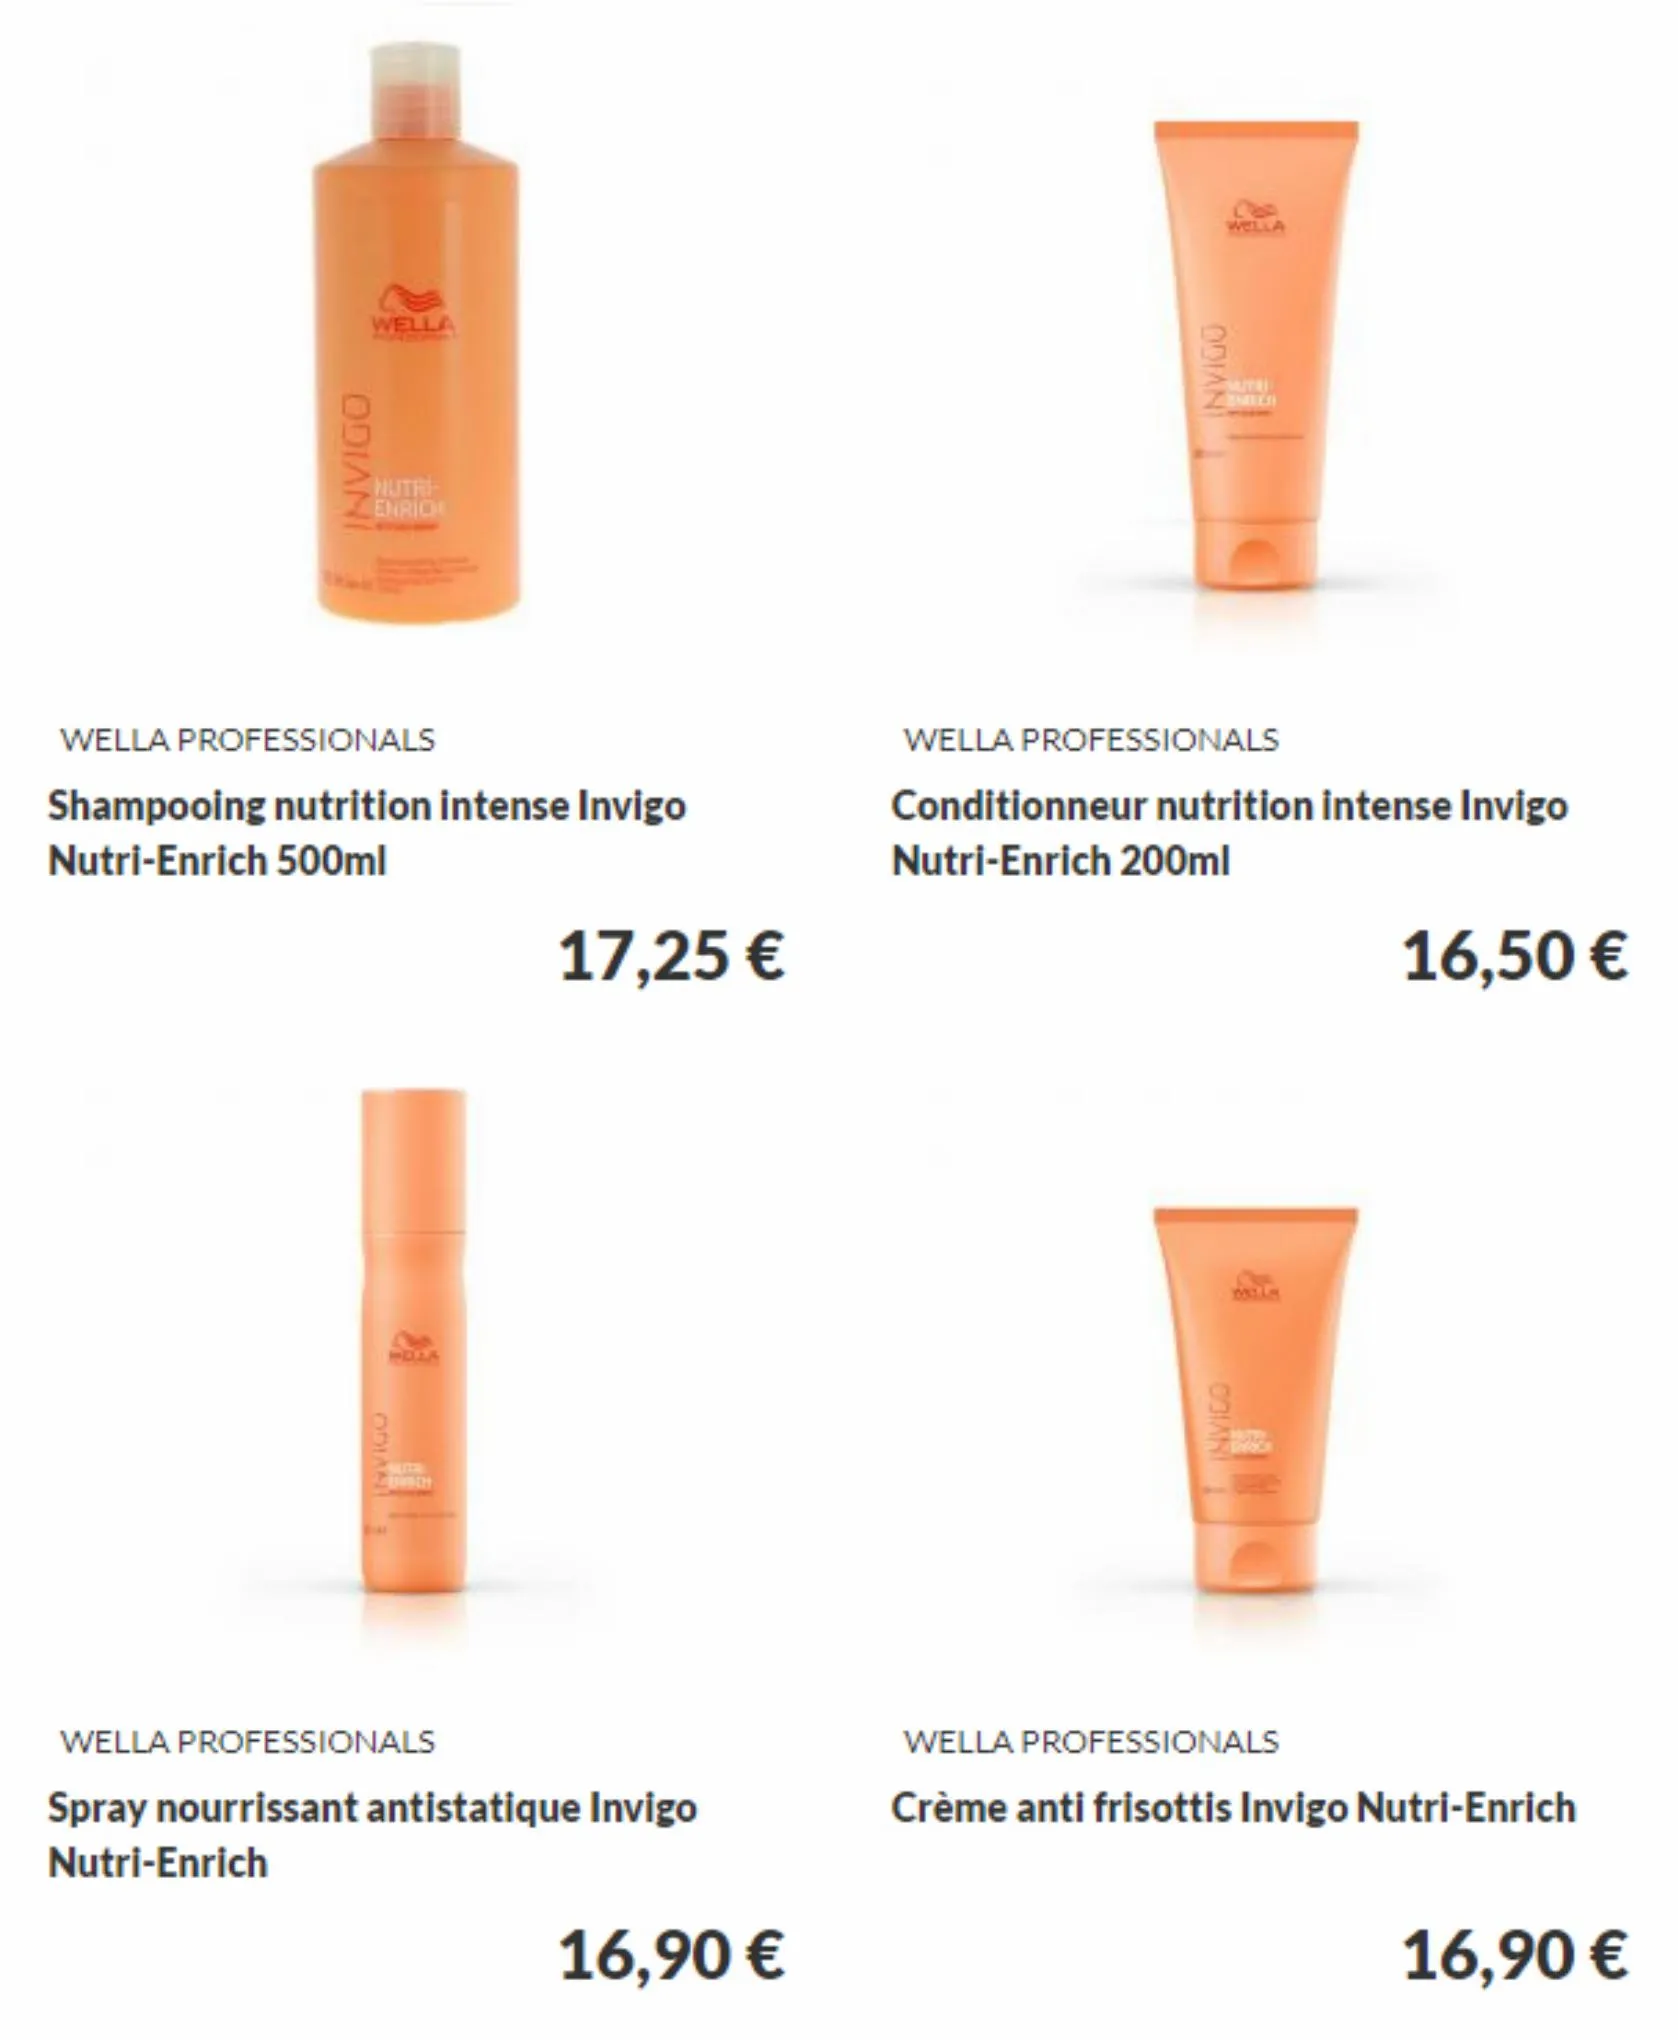 Catalogue OFFRE ROUTINE COULEUR SOIN COIFFAGE WELLA!, page 00007